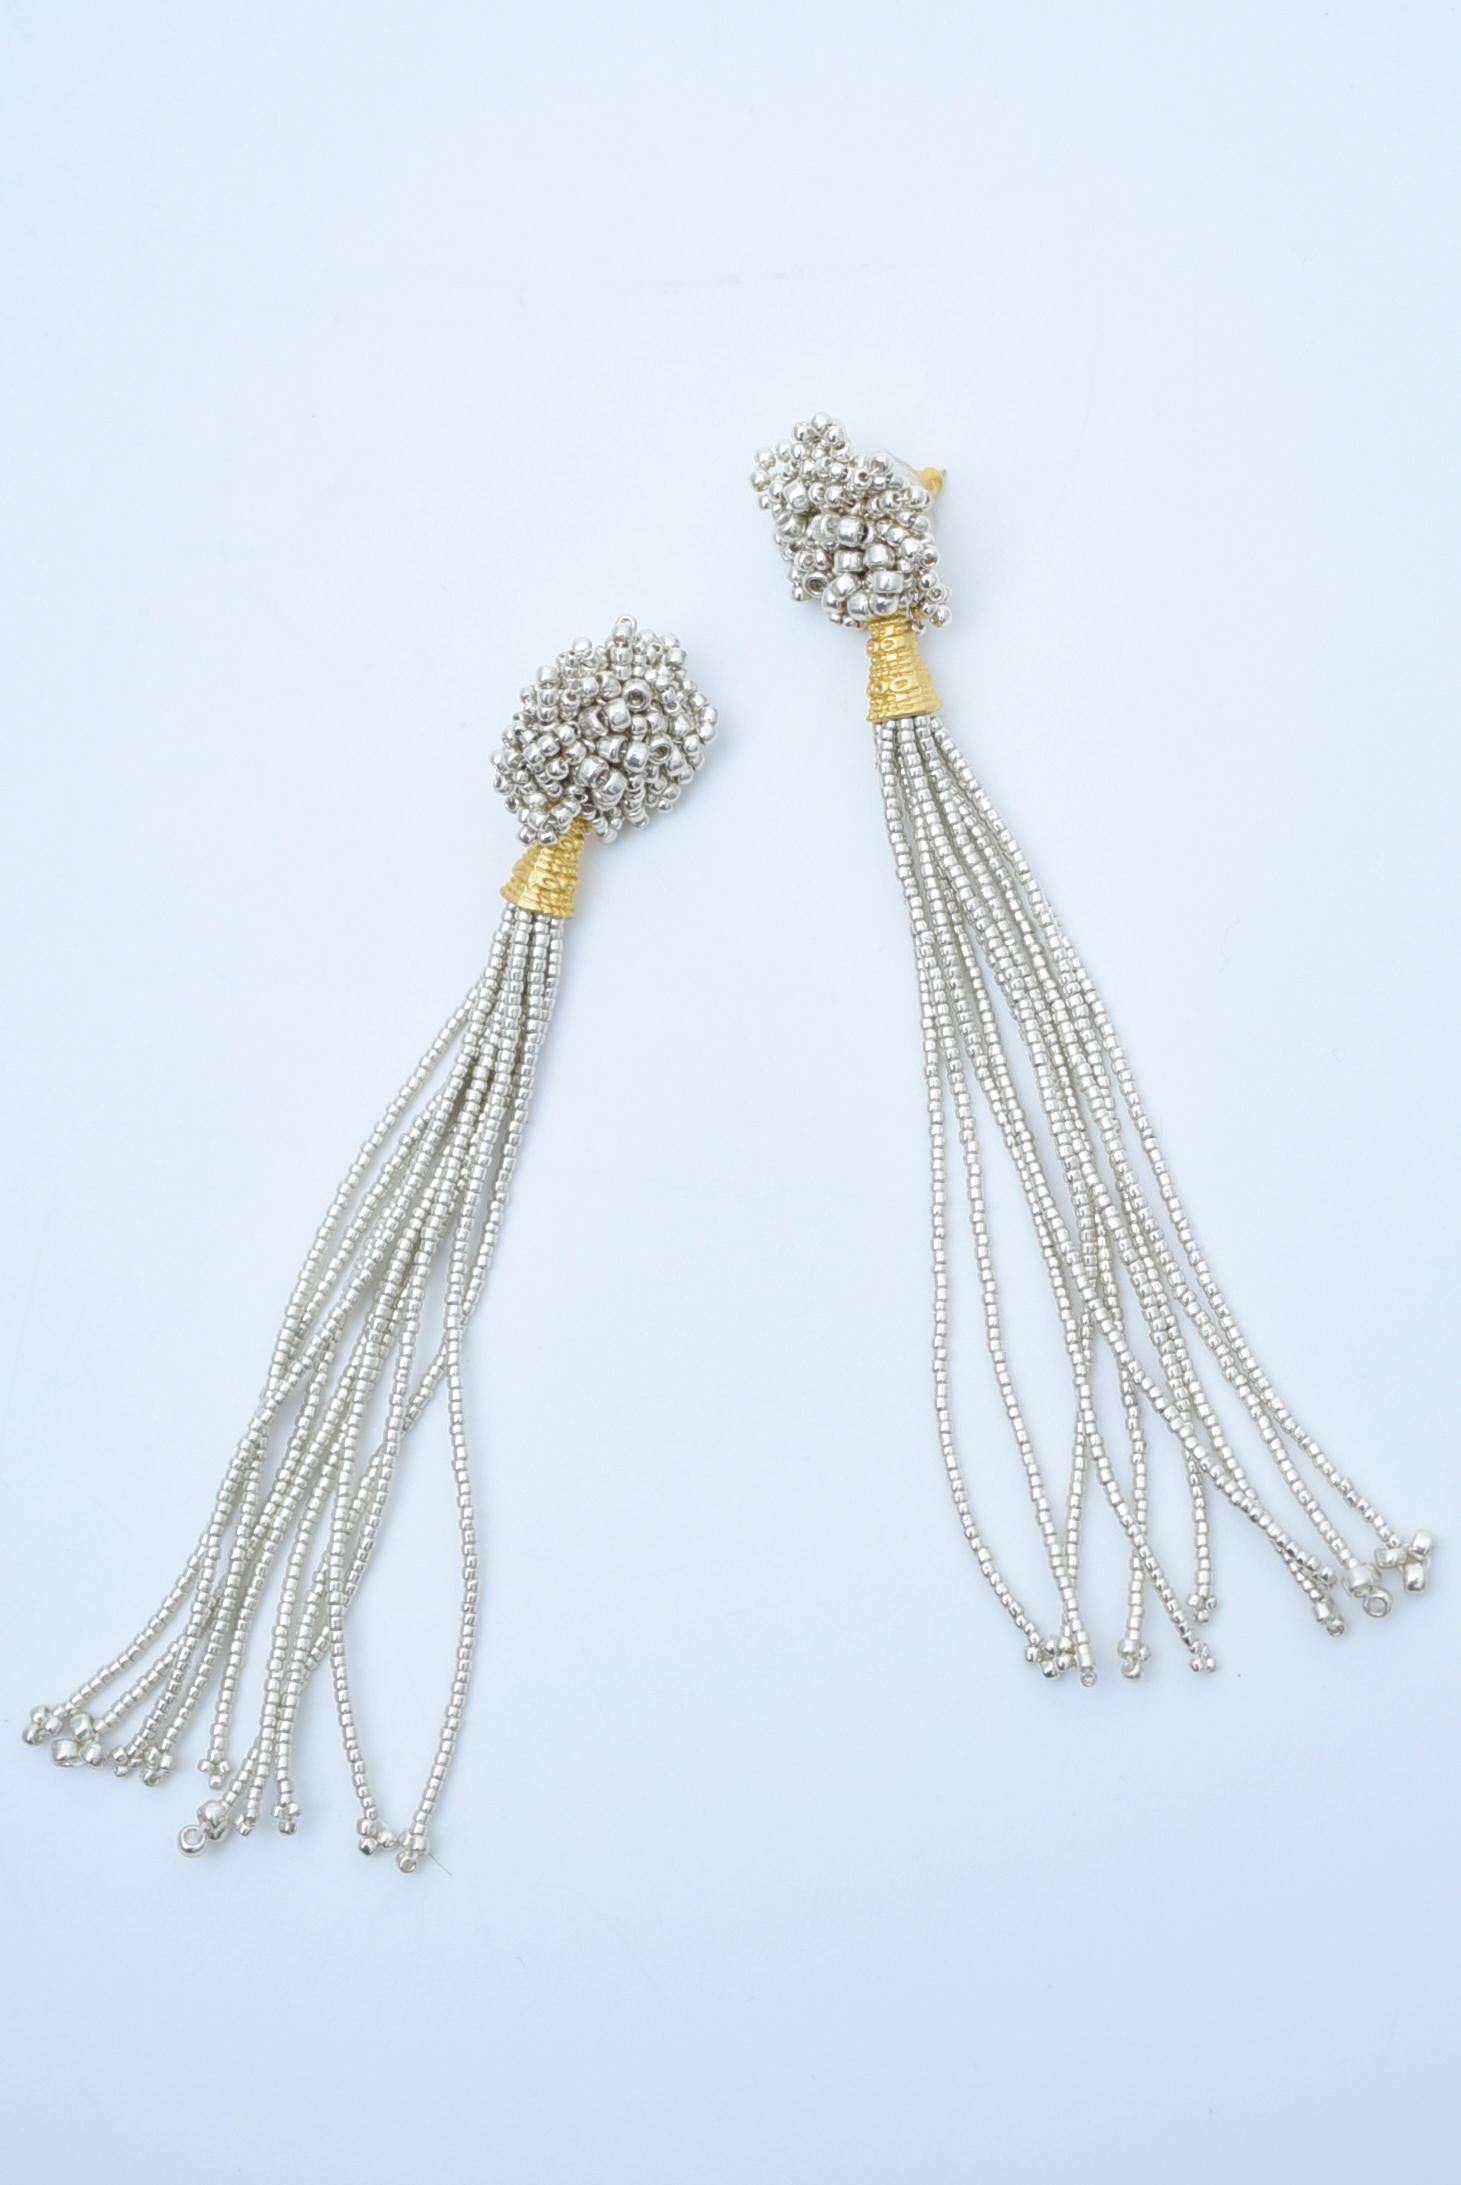 material:Brass, 1970's Vintage Czech beads,grass beads, stainless
size:length 12cm

The design is inspired by raindrops and water droplets on glass!
Made from several different sizes of silver beads woven together.
The delicate wirework is